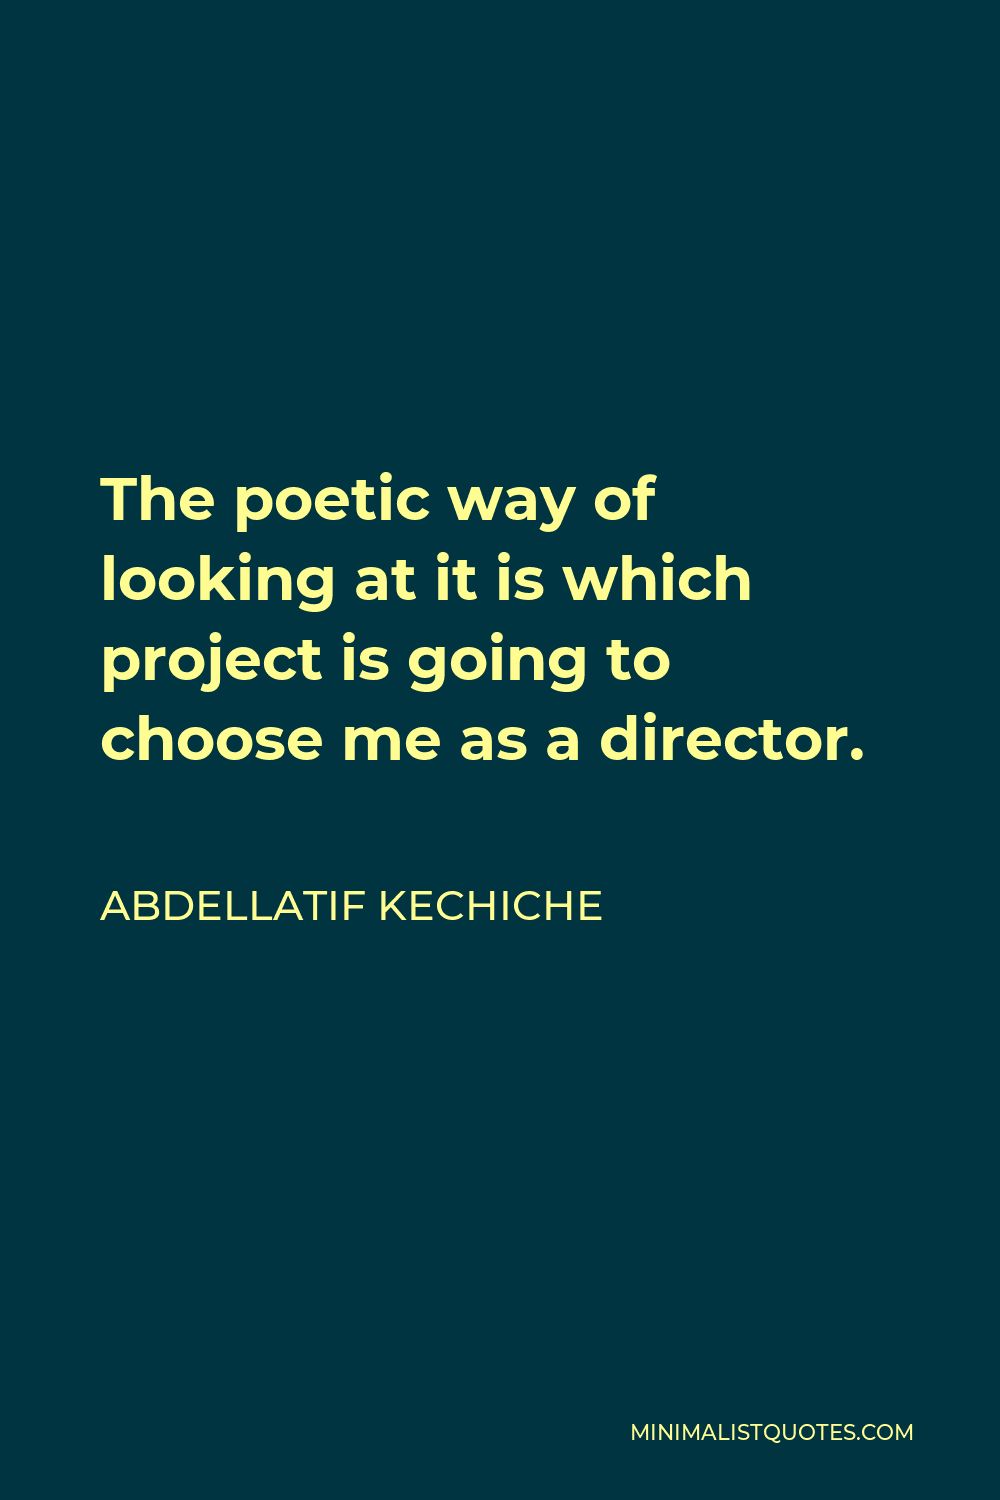 Abdellatif Kechiche Quote - The poetic way of looking at it is which project is going to choose me as a director.